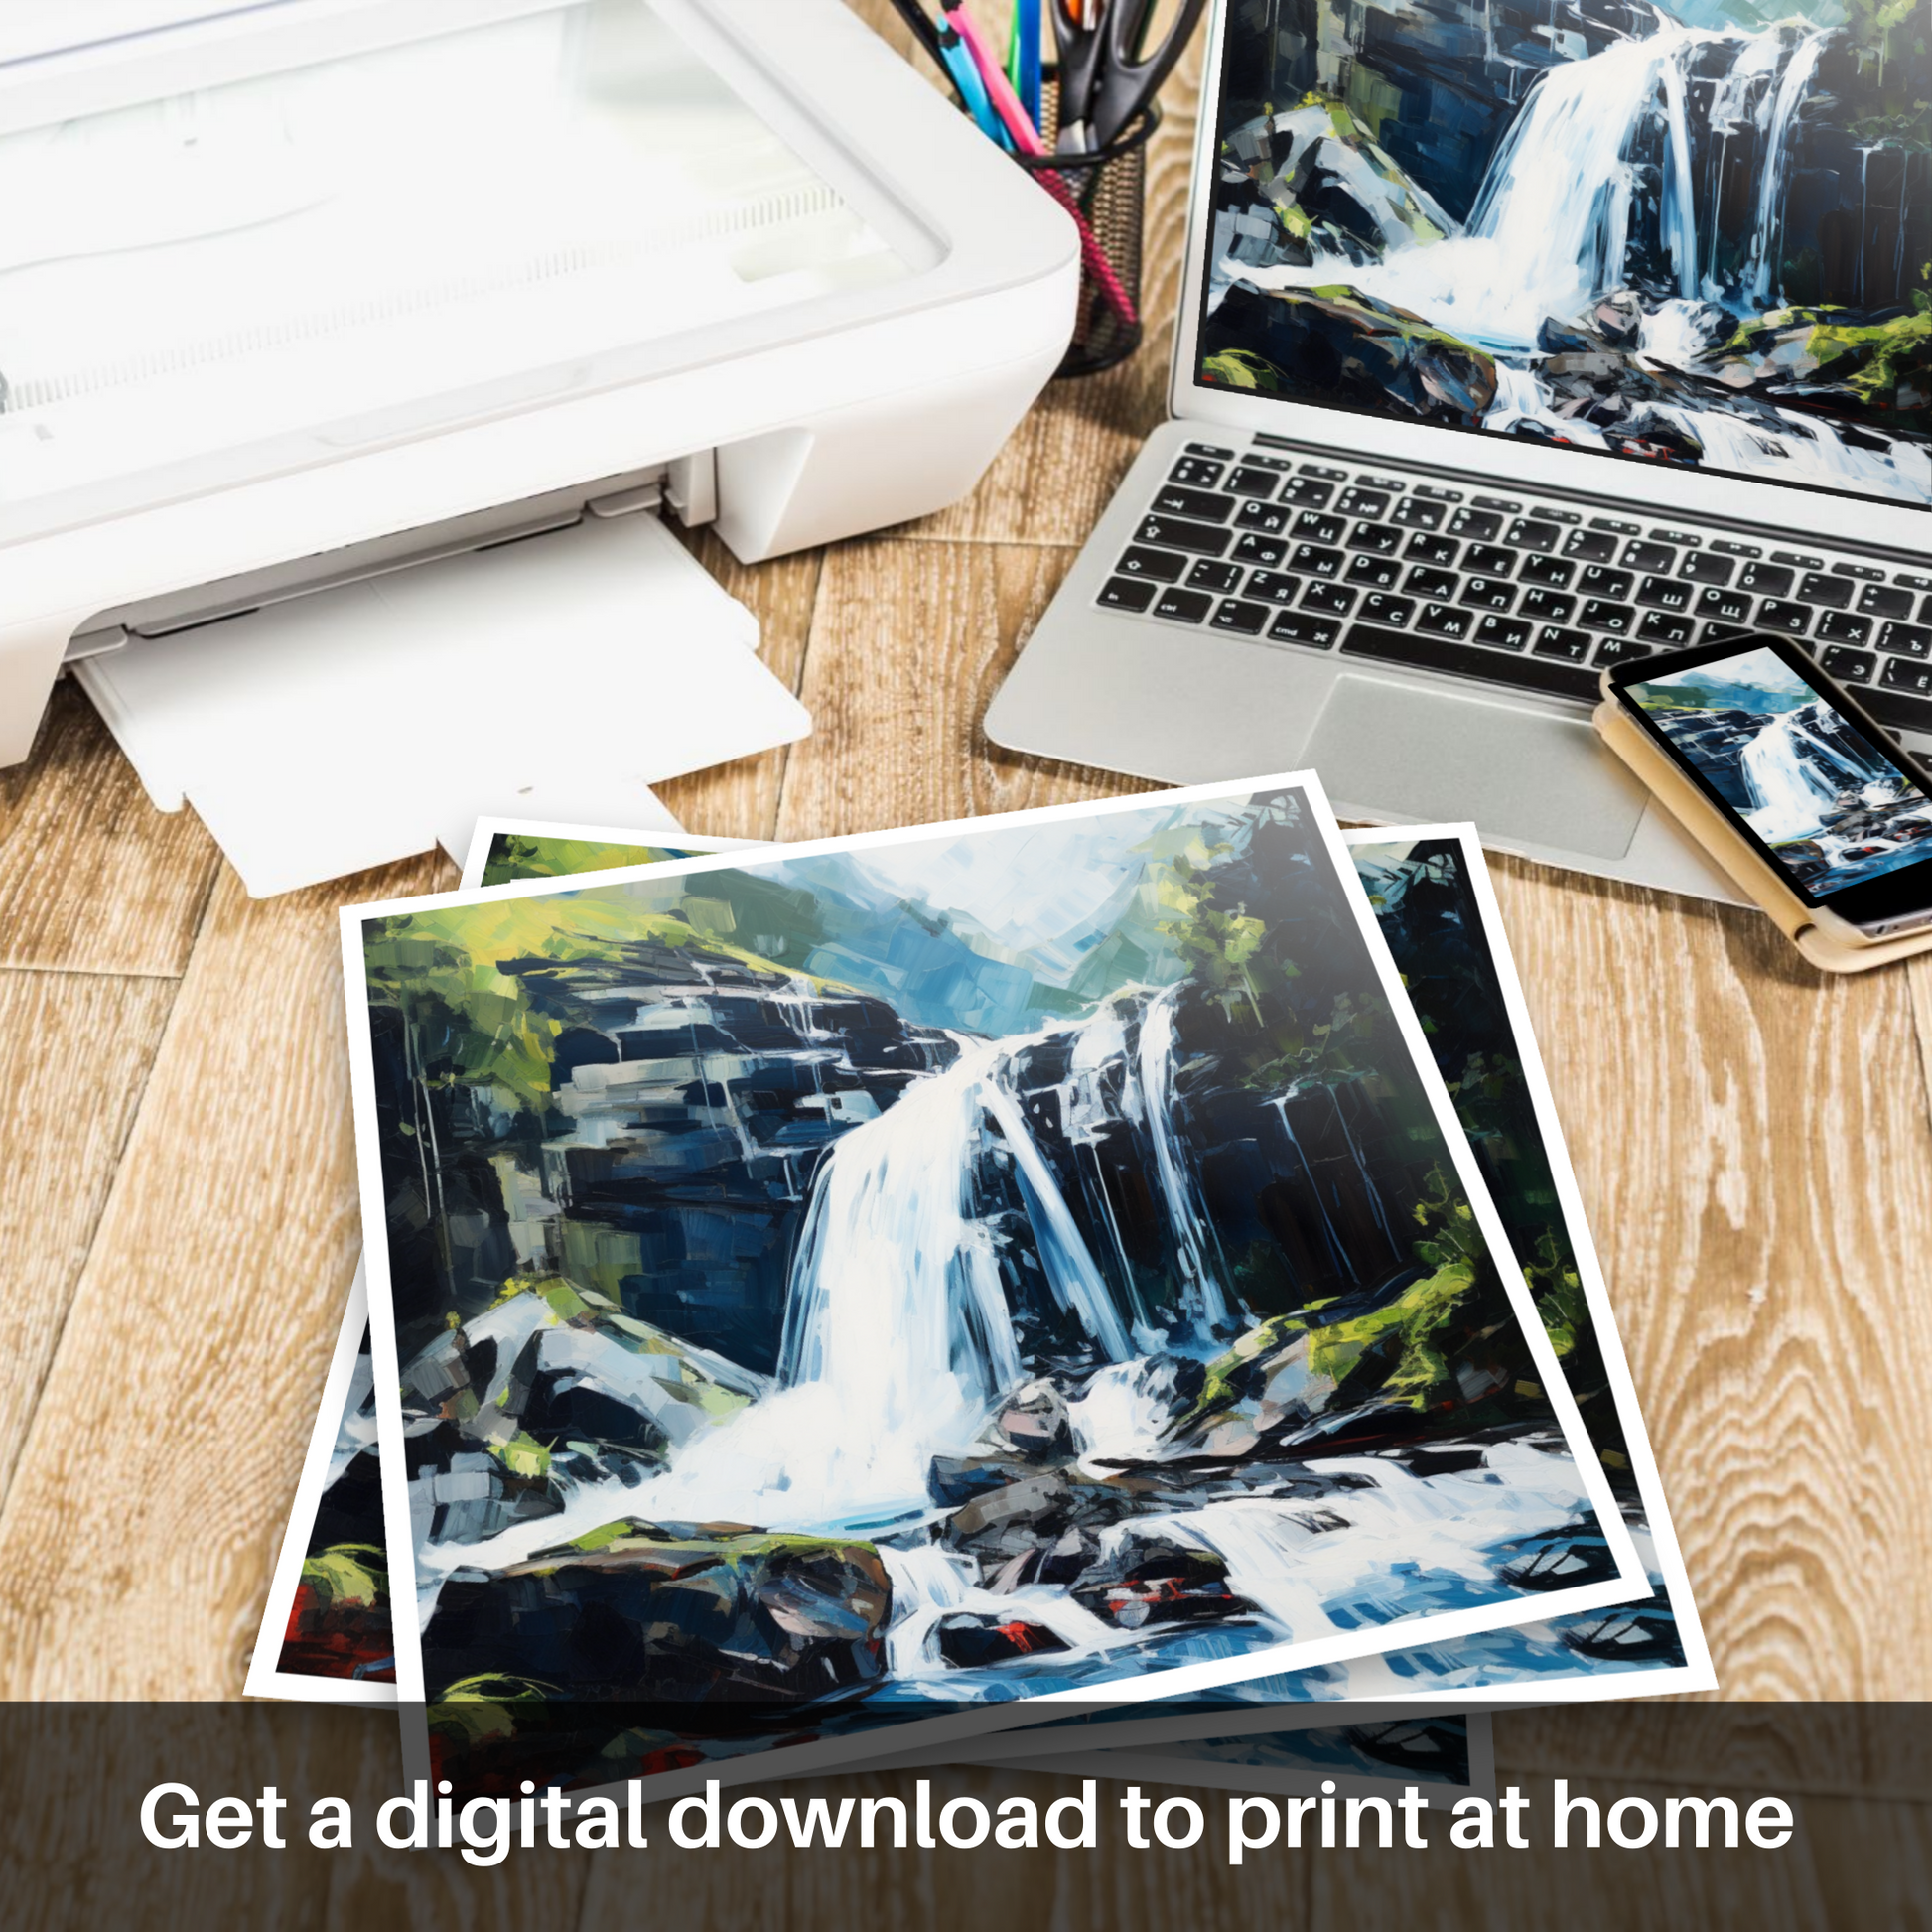 Downloadable and printable picture of Cascading waterfall in Glencoe